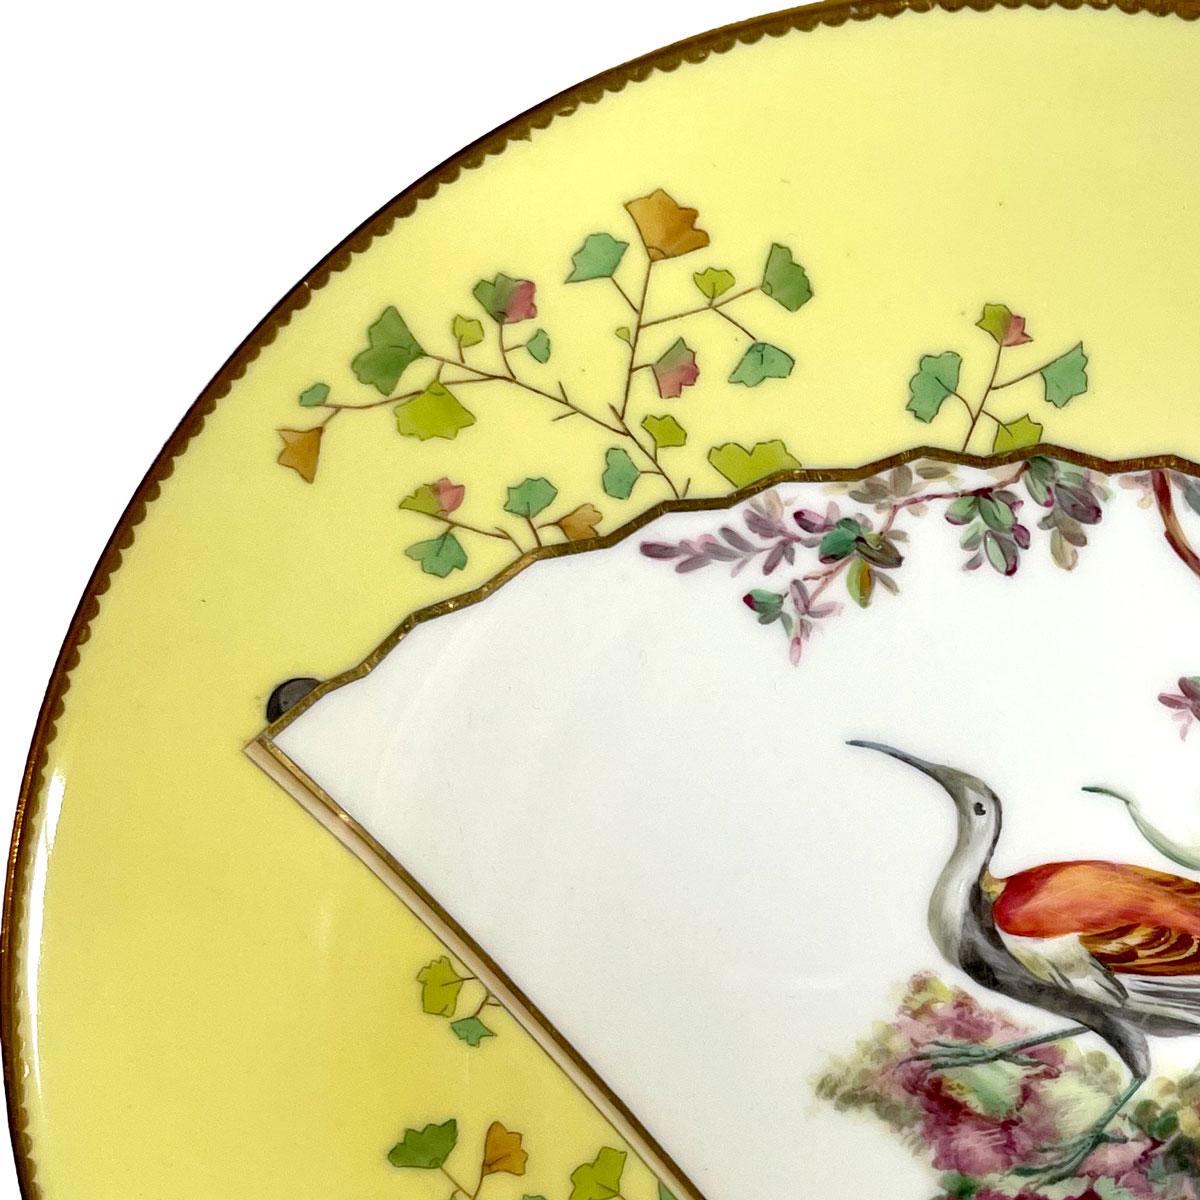 Yellow Aesthetic Minton Porcelain Plate in the style of Japonism creations made by Christopher Dresser. Round plate adorned with an oriental fan representing a lovely and colorful bird. Lovely decorations, with plants and oriental items.
Stamped